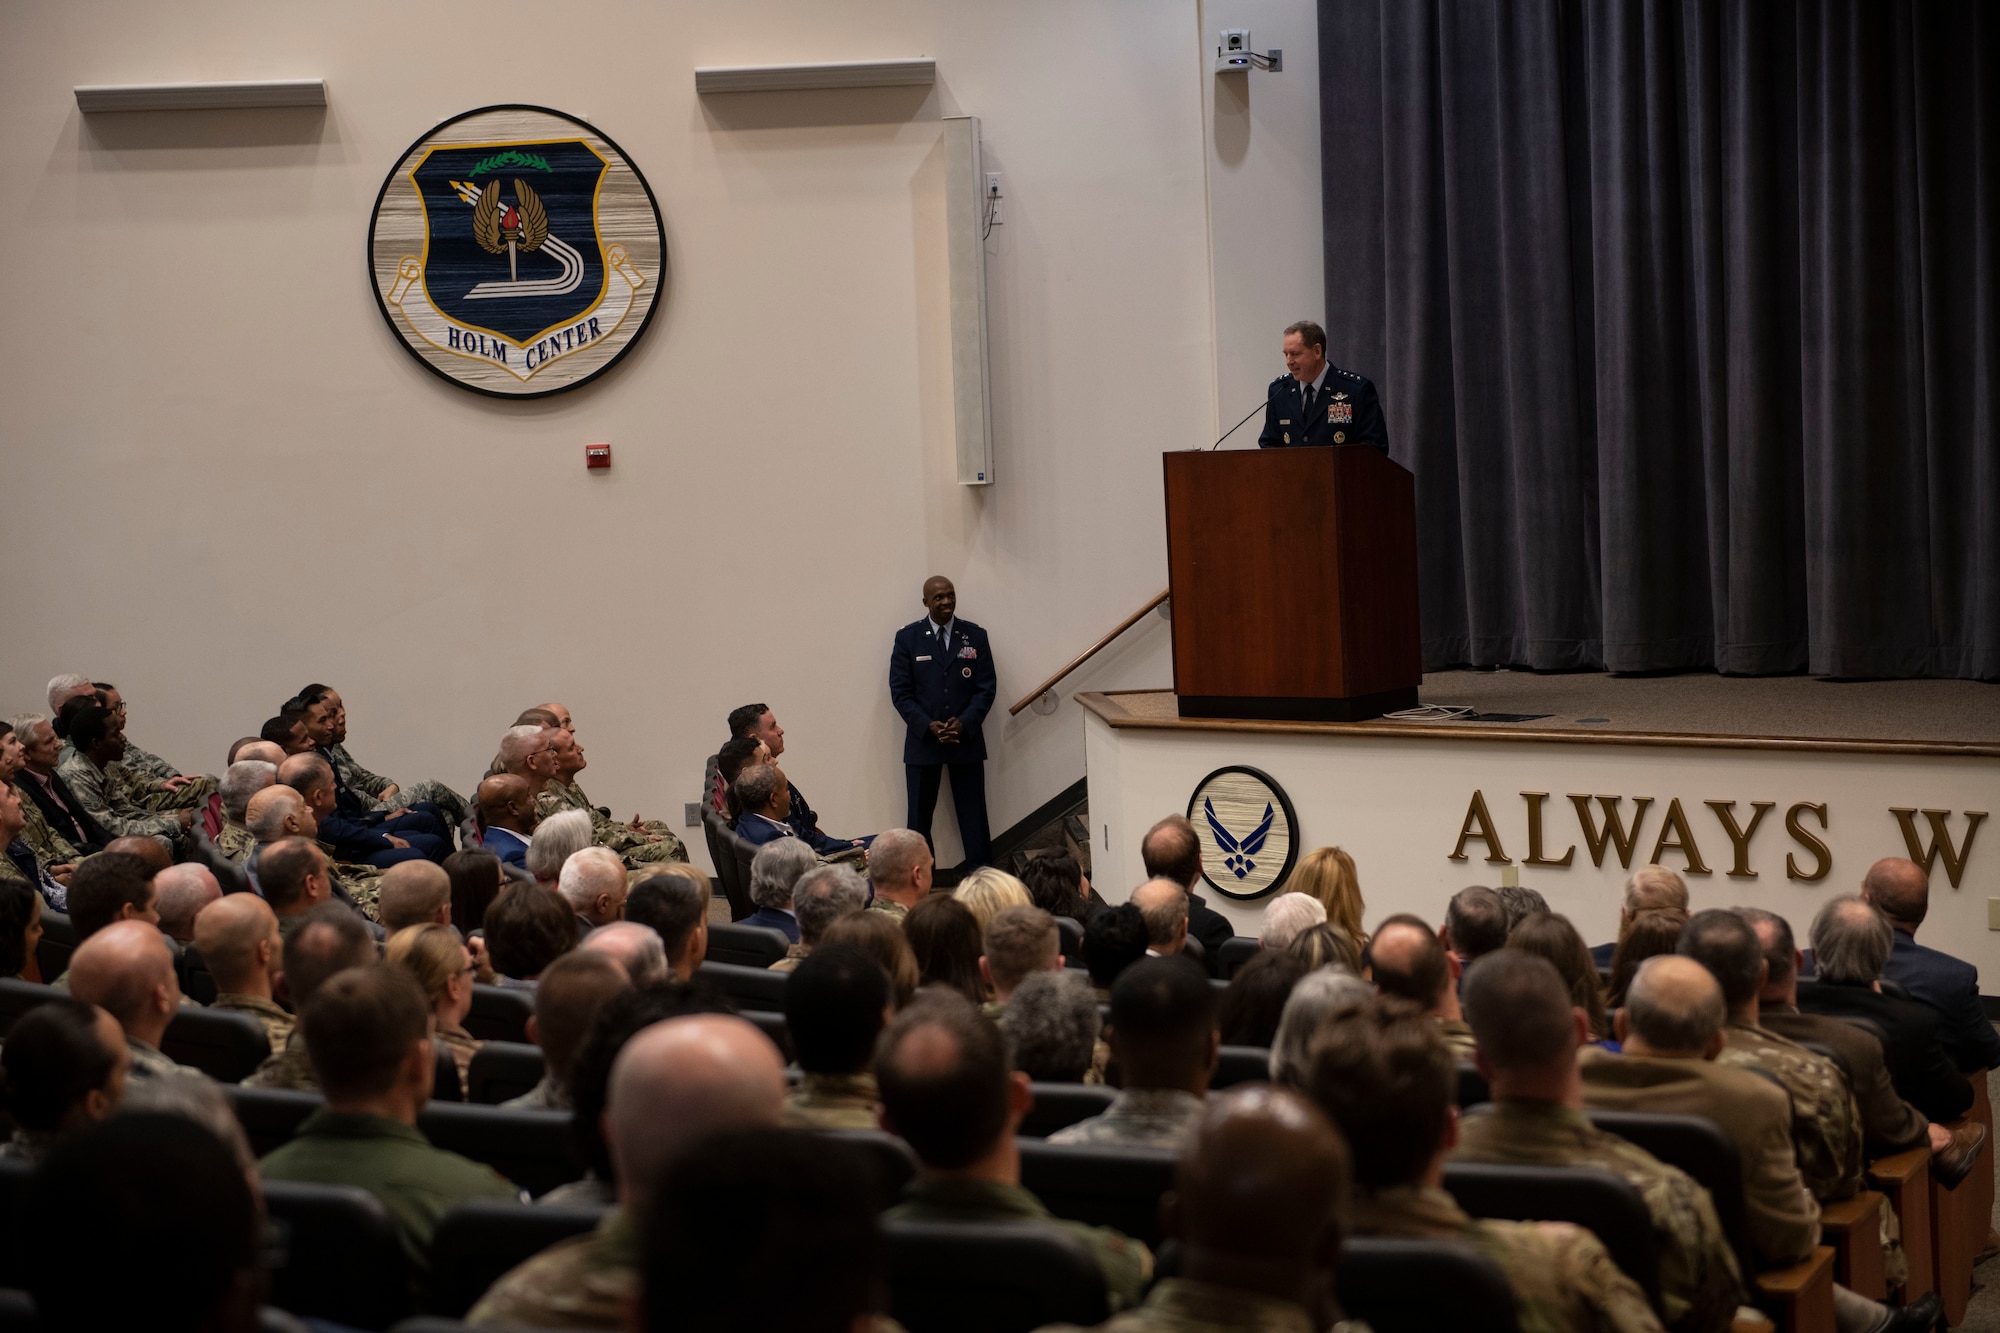 Lt. Gen. Brad Webb, commander of Air Education and Training Command, addresses the audience during an assumption of command ceremony in which Lt. Gen. James B. Hecker takes over as the commander and president of Air University Nov. 22, 2019, at Maxwell Air Force Base, Alabama. The AU is responsible for officer commissioning through Officer Training School and the Reserve Officer Training Corps.